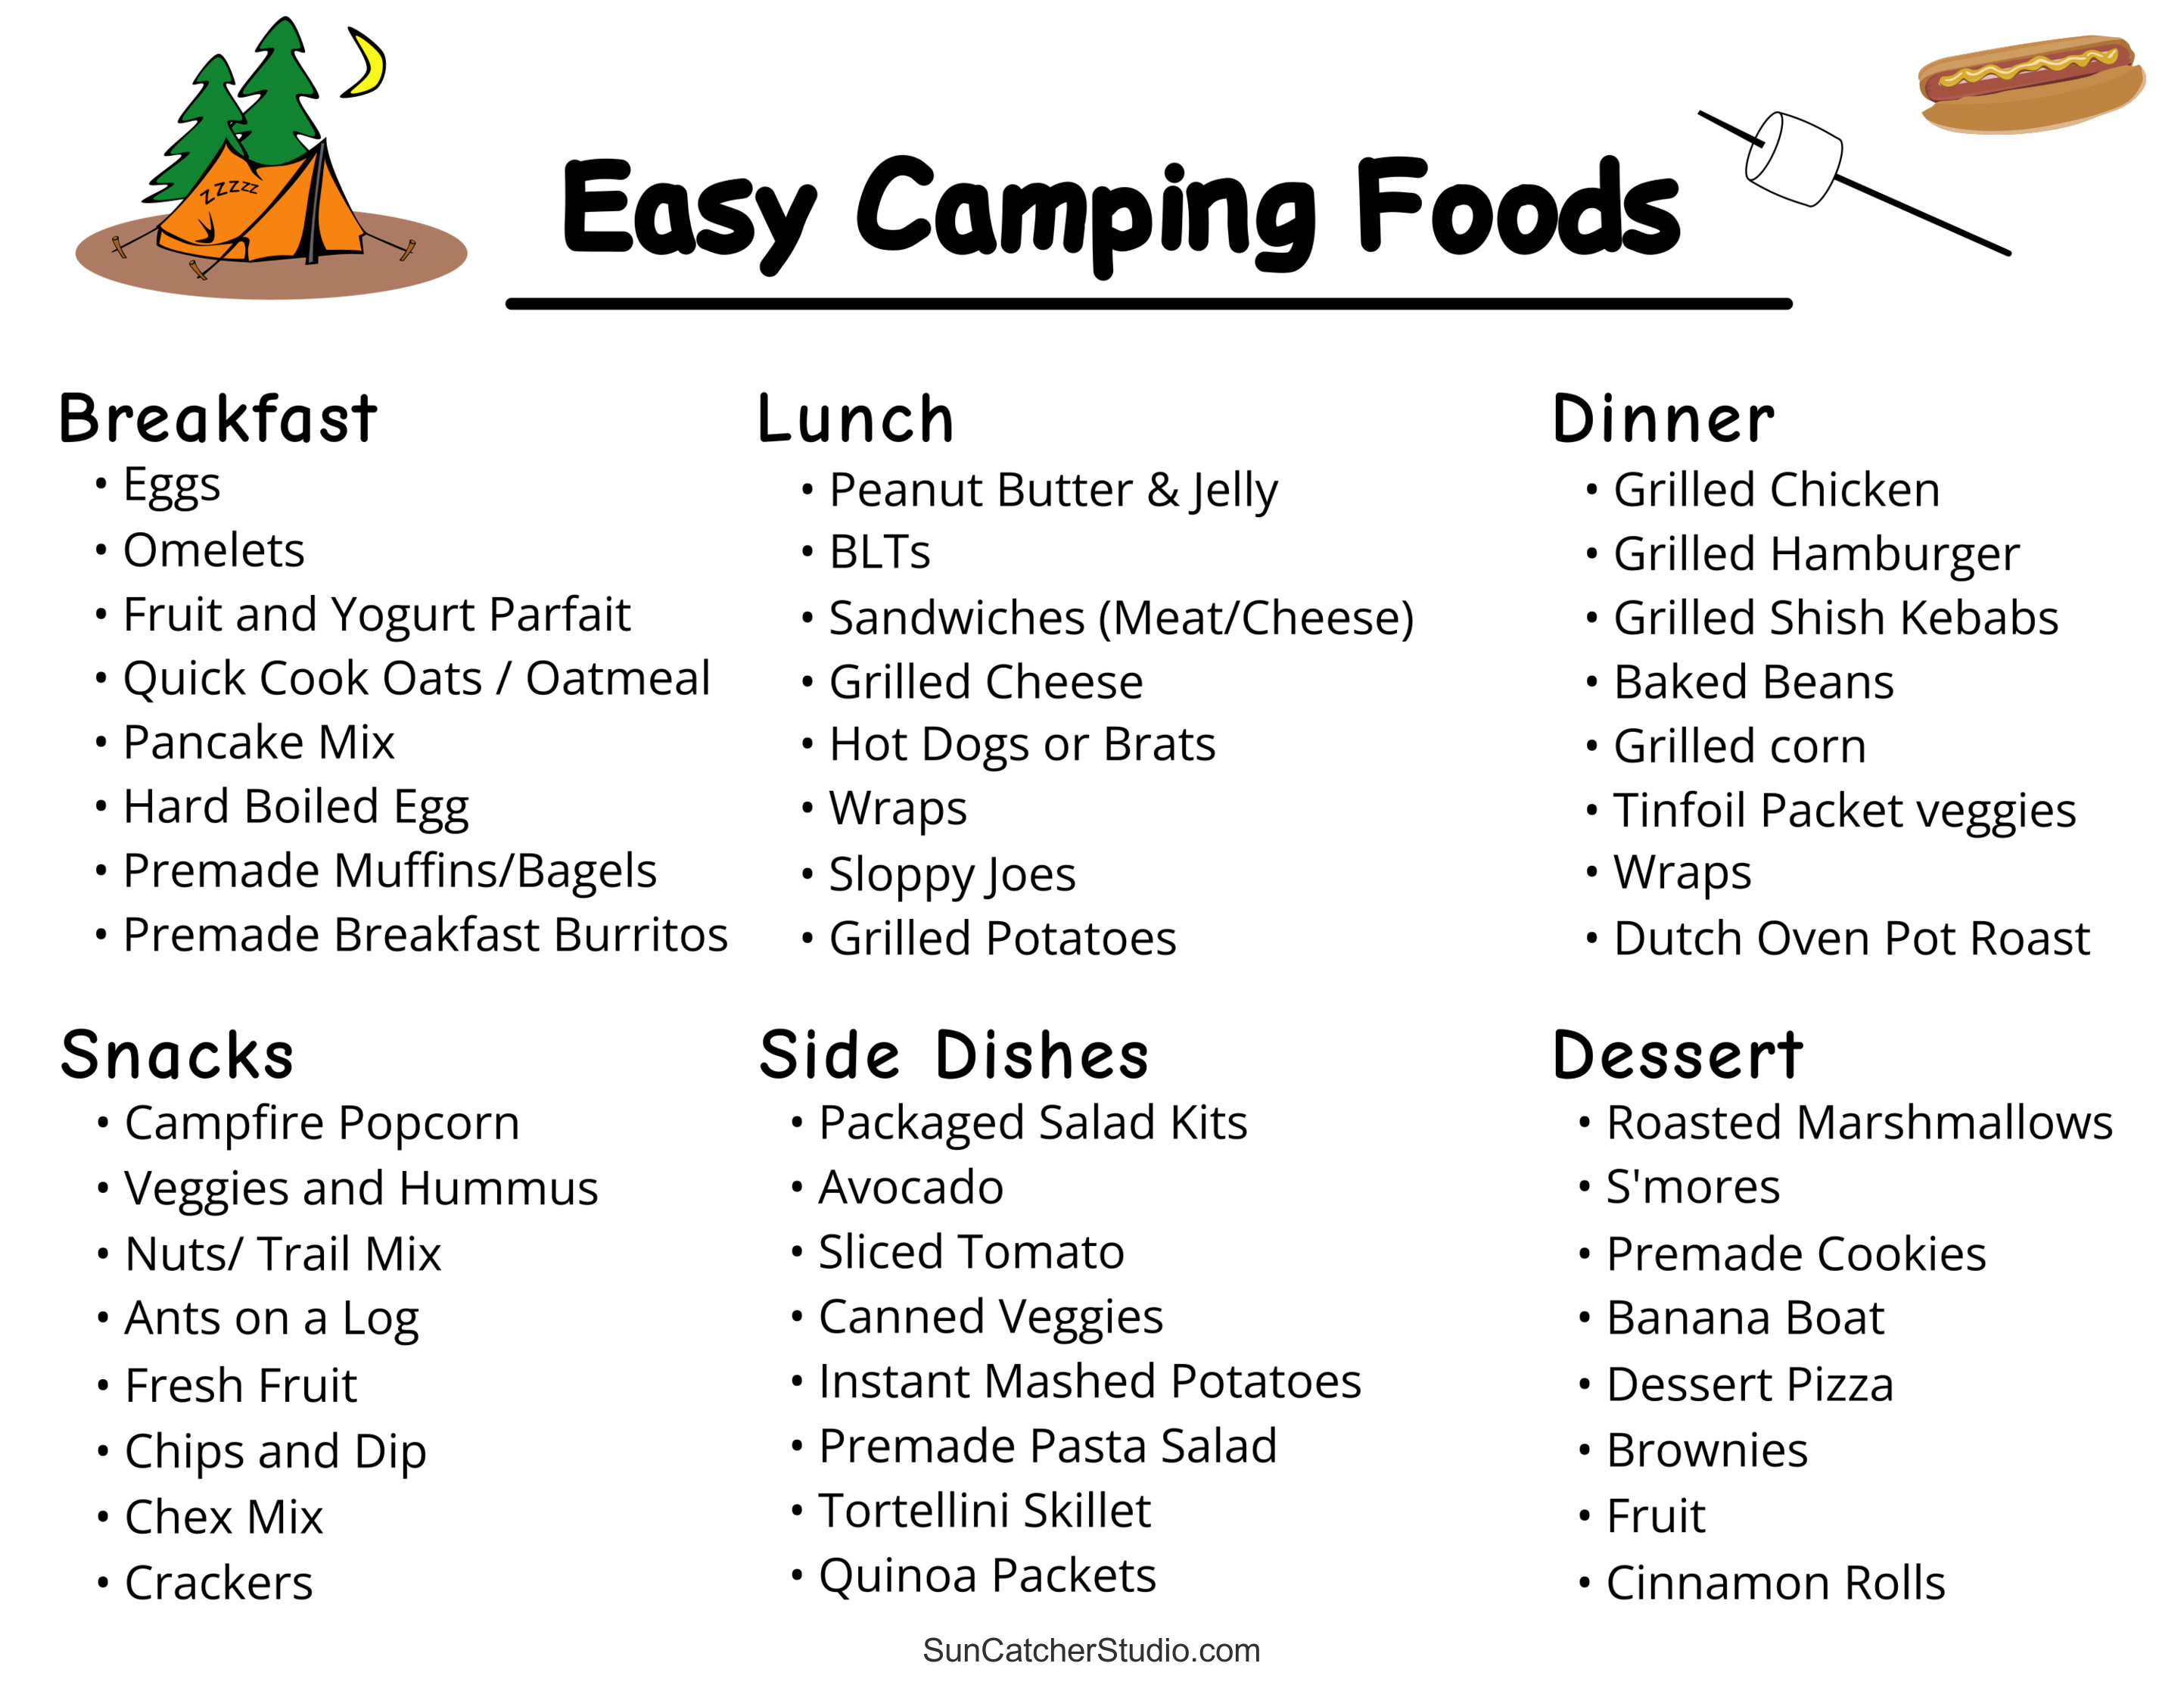 Camping Checklist Essentials, The Necessities You Need When Camping, Shelter, Cooking, Personal Items, & Misc.